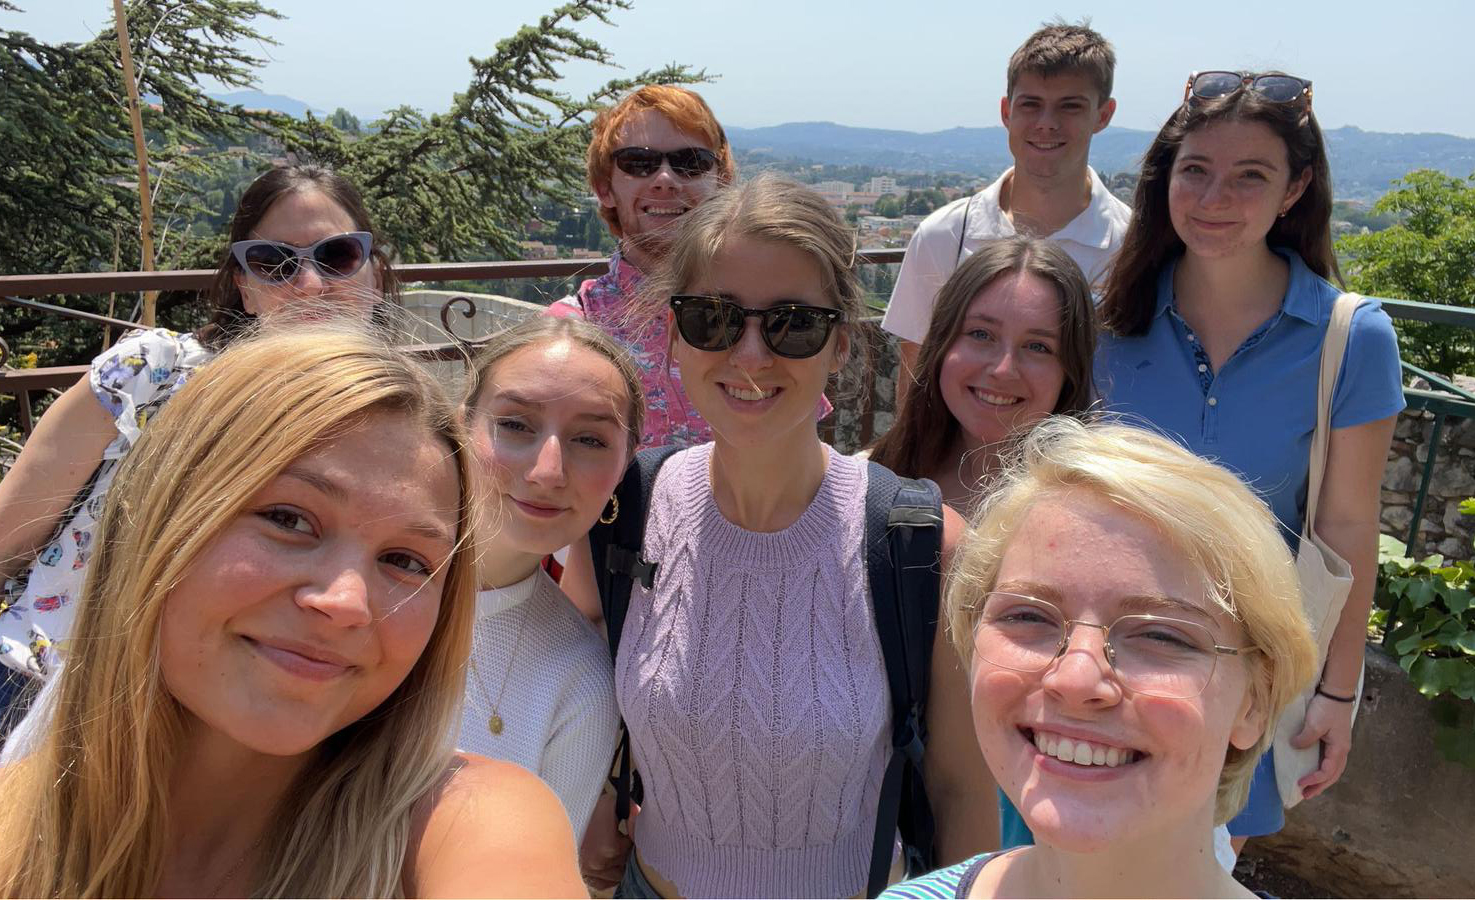 UM students got the opportunity of a lifetime to attend the Cannes Film Festival while taking courses from Anne Quinney (back left), professor of French. Besides attending the festival, the classes explored the French Riviera and took in the culture. Submitted photo